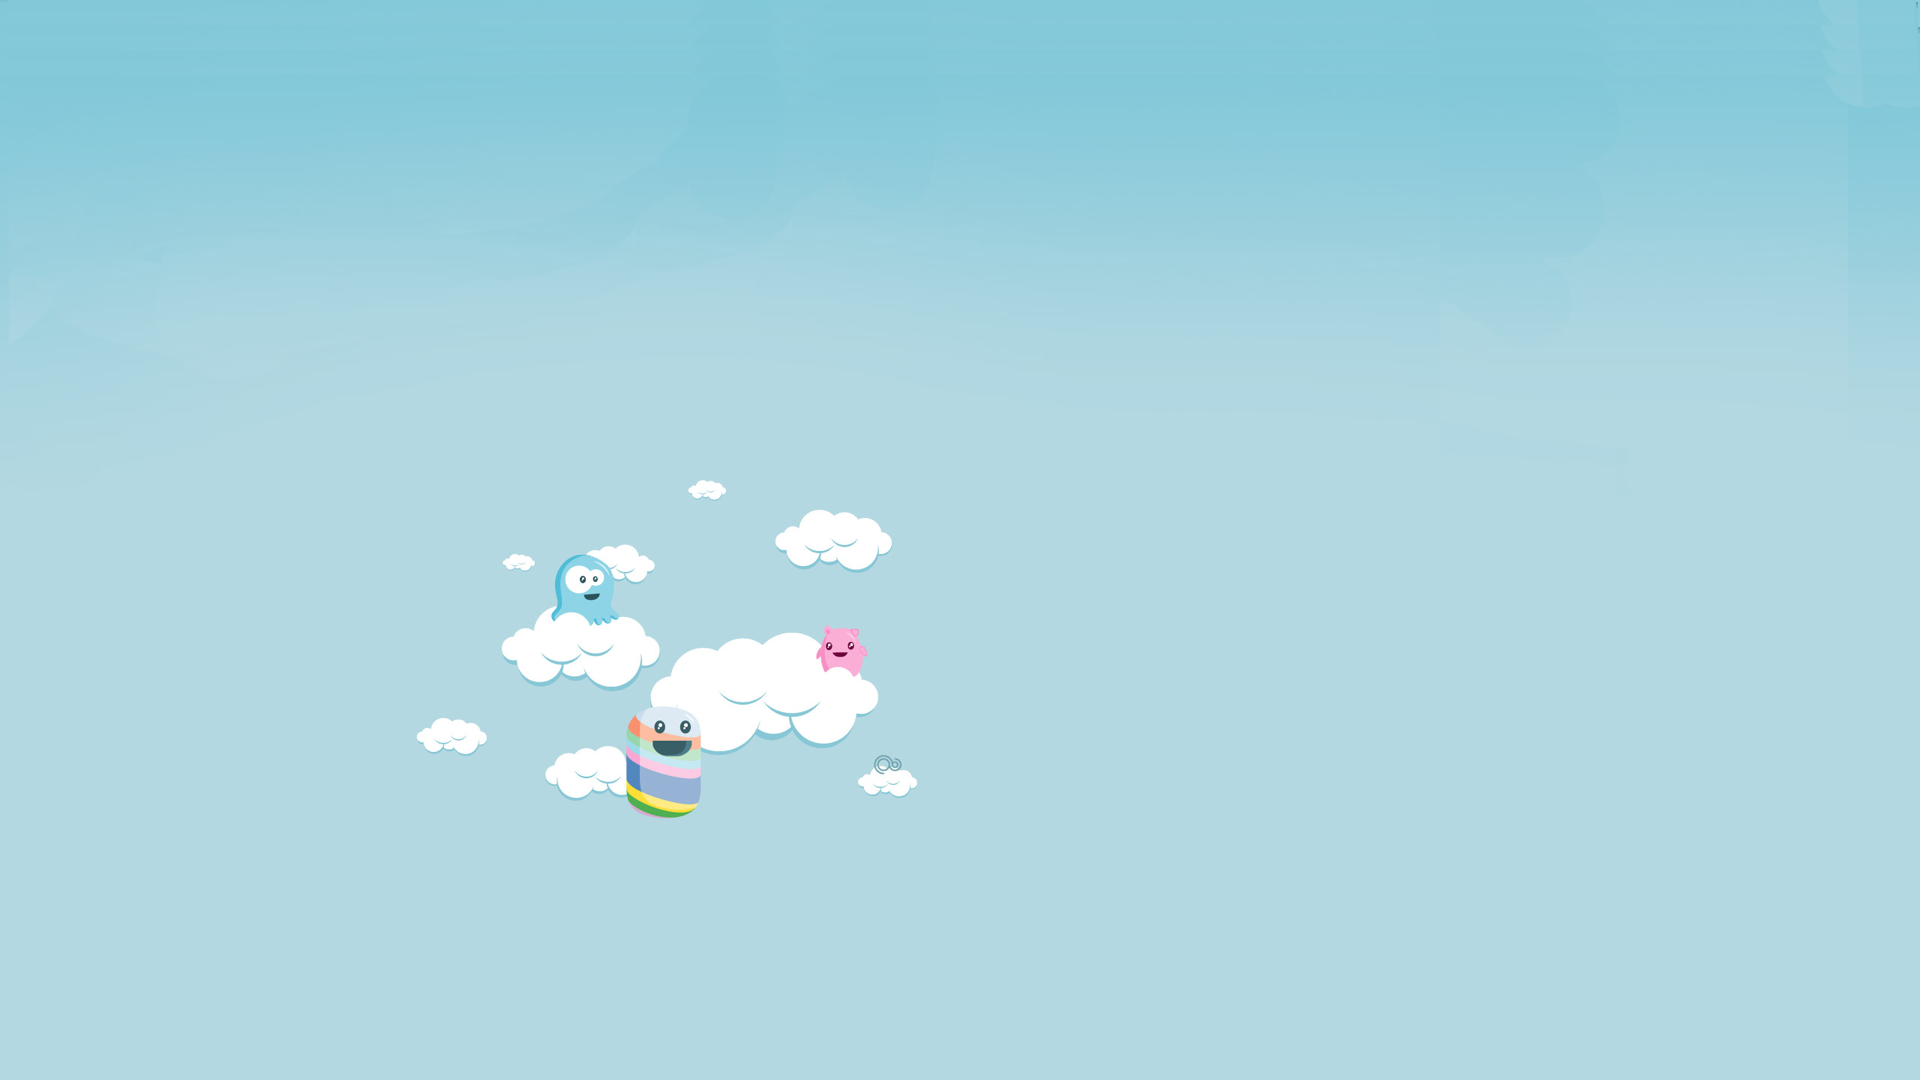 General 1920x1080 minimalism simple background clouds happy cyan background